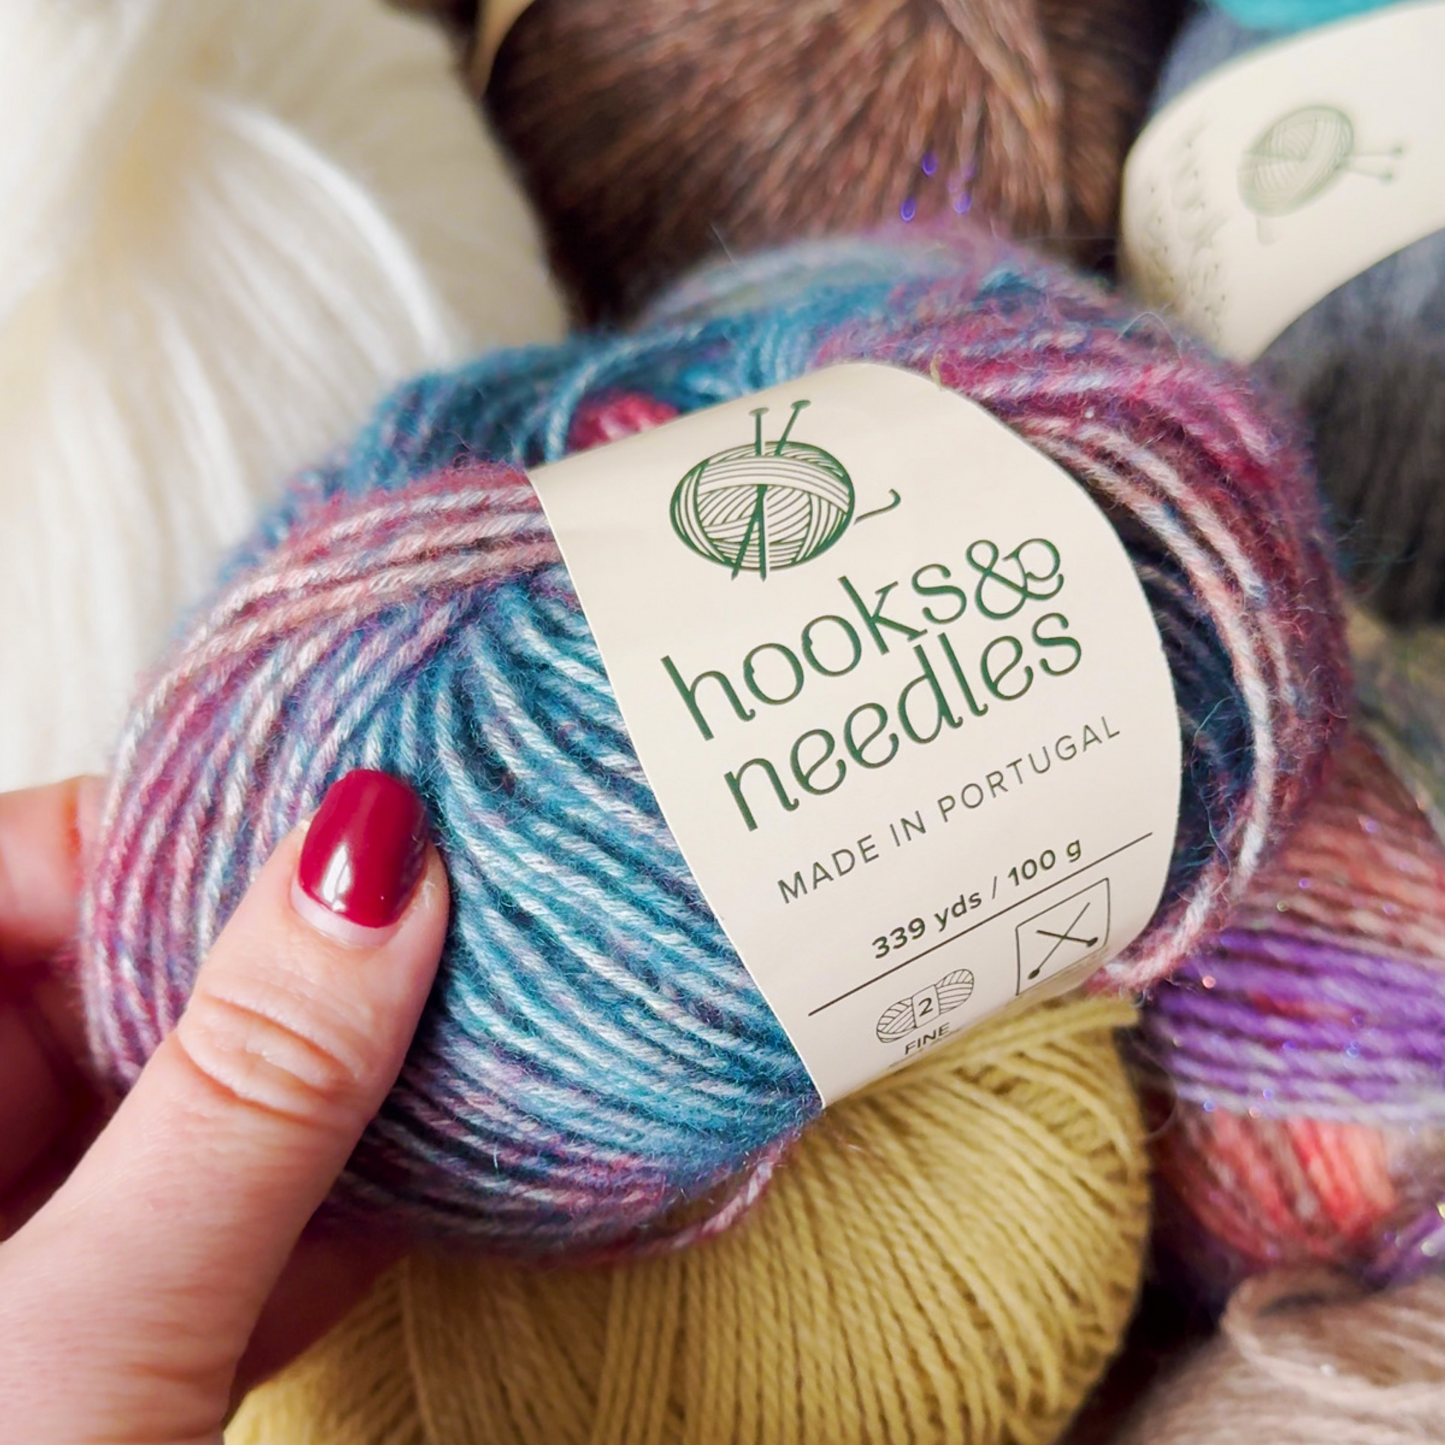 A hand holding a skein of multicolored yarn with a label that reads "[3-Month-Prepaid] Hooks & Needles Subscription Box #15, made in portugal." a variety of yarns are visible in the background.